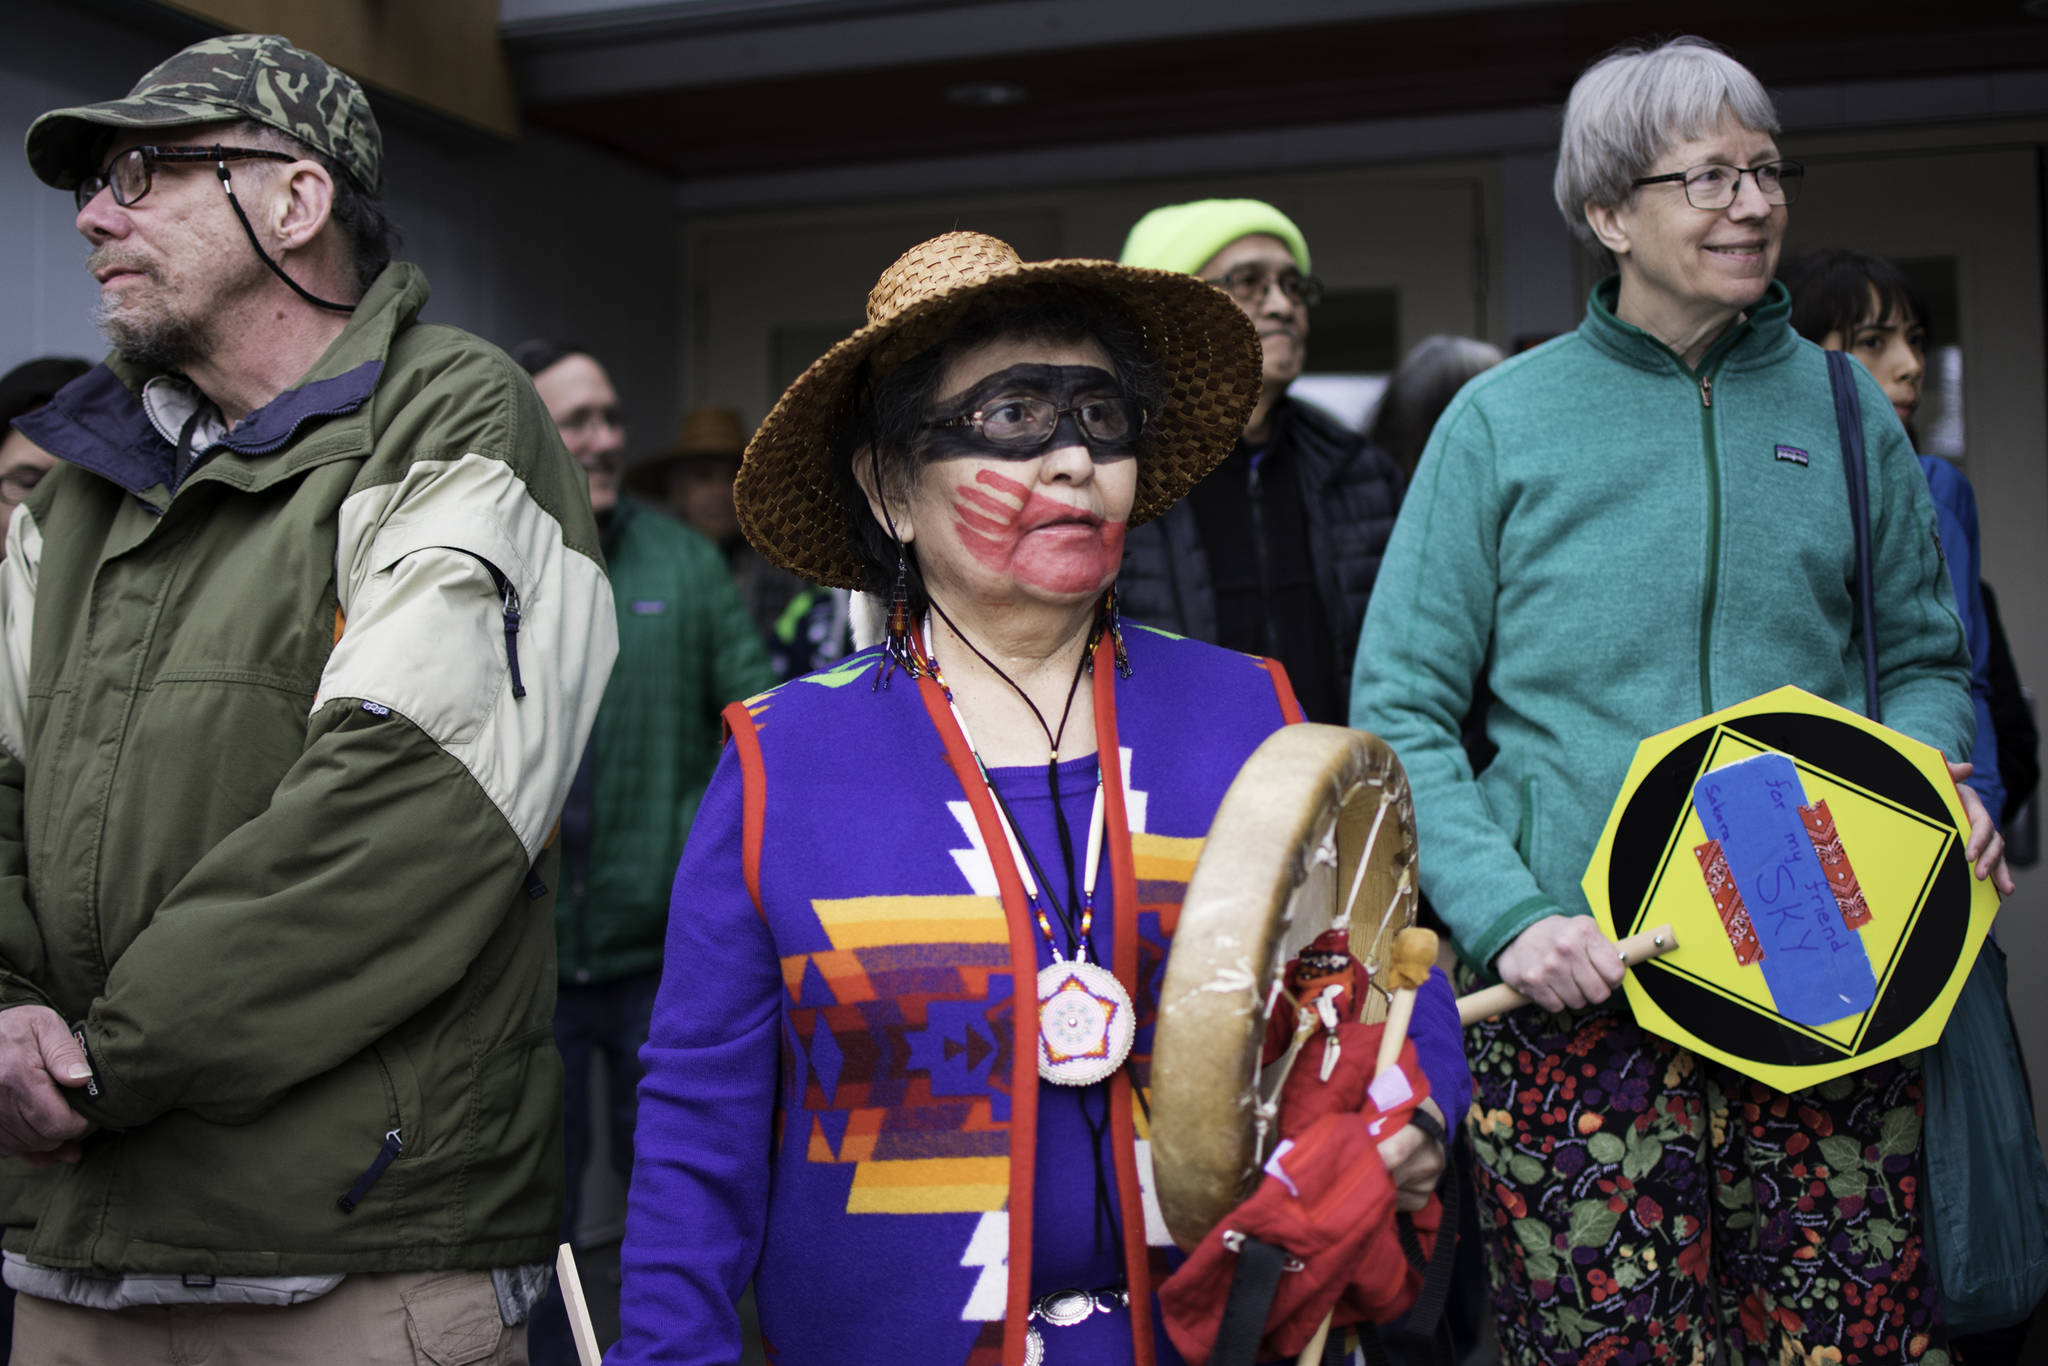 Irma Young prepares to march in the Violence Against Women Awareness Rally in front of Elizabeth Peratrovich Hall on Friday, April 20, 2018. (Richard McGrail | Juneau Empire)